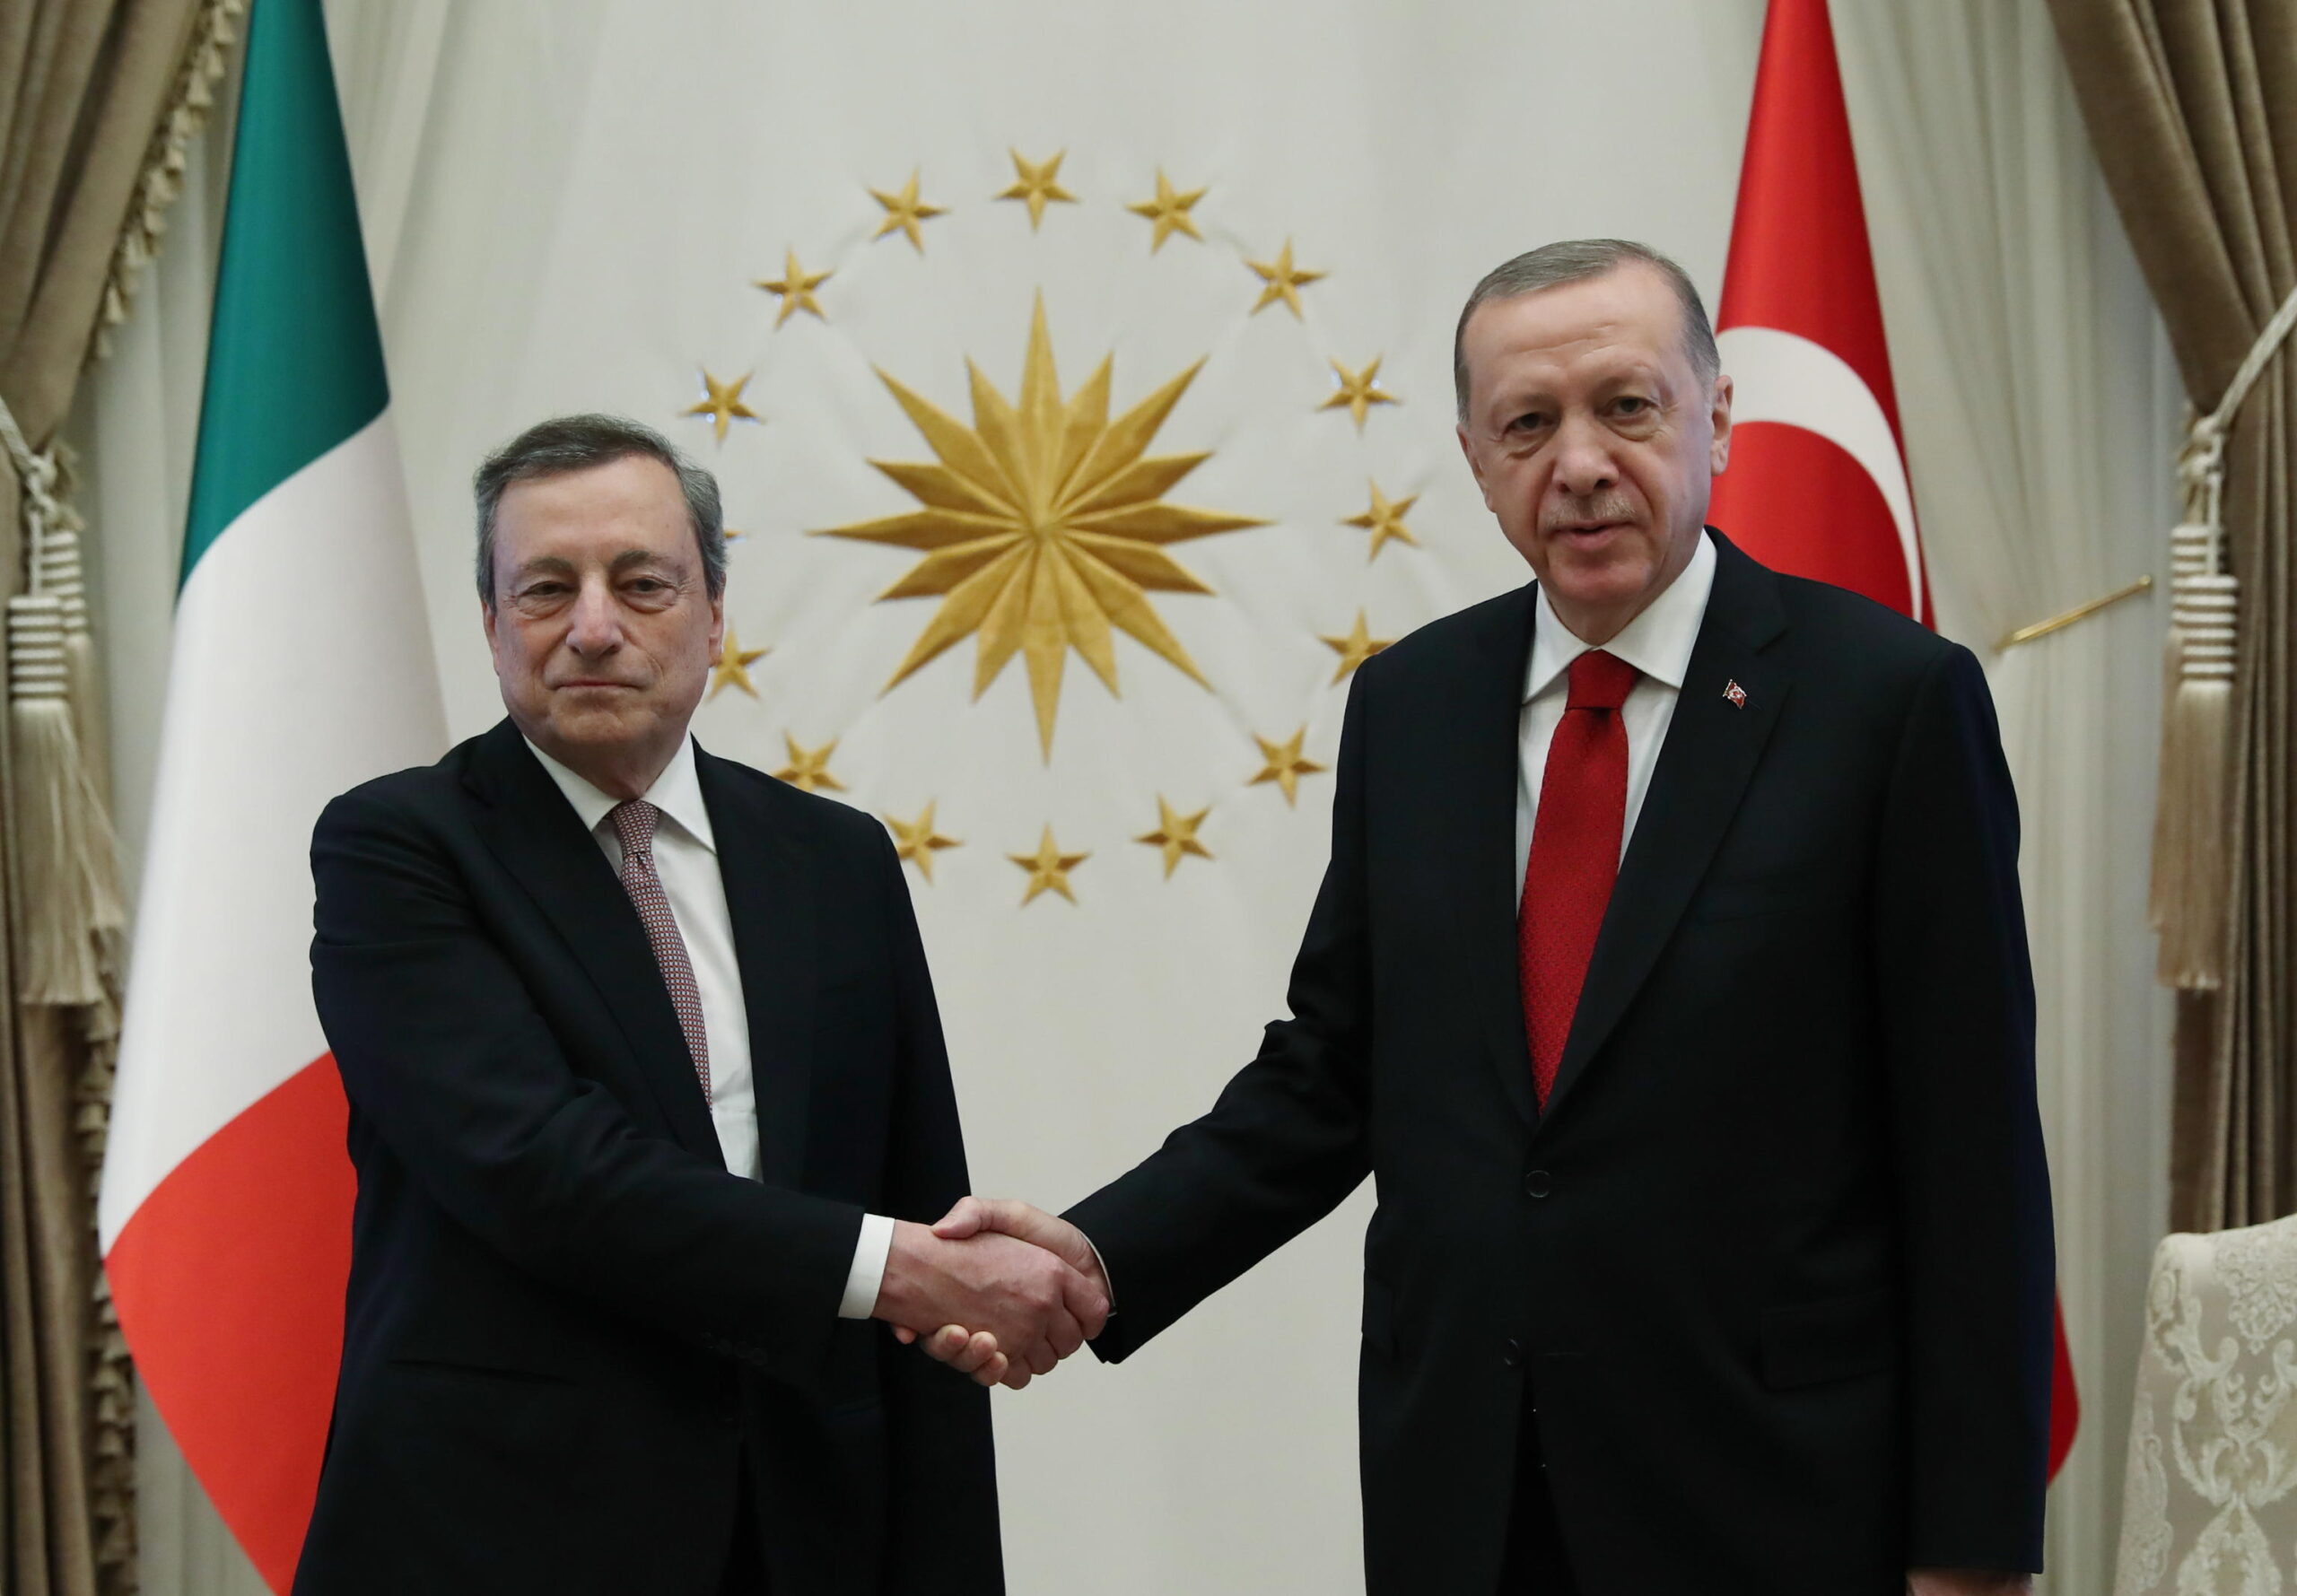 epa10053498 A handout photo made available by the Turkish President Press Office shows Turkish President Recep Tayyip Erdogan (R) and Italian Prime Minister Mario Draghi (L) posing before their meeting in Ankara, Turkey, 05 July 2022.  EPA/TURKISH PRESIDENT PRESS OFFICE HANDOUT  HANDOUT EDITORIAL USE ONLY/NO SALES